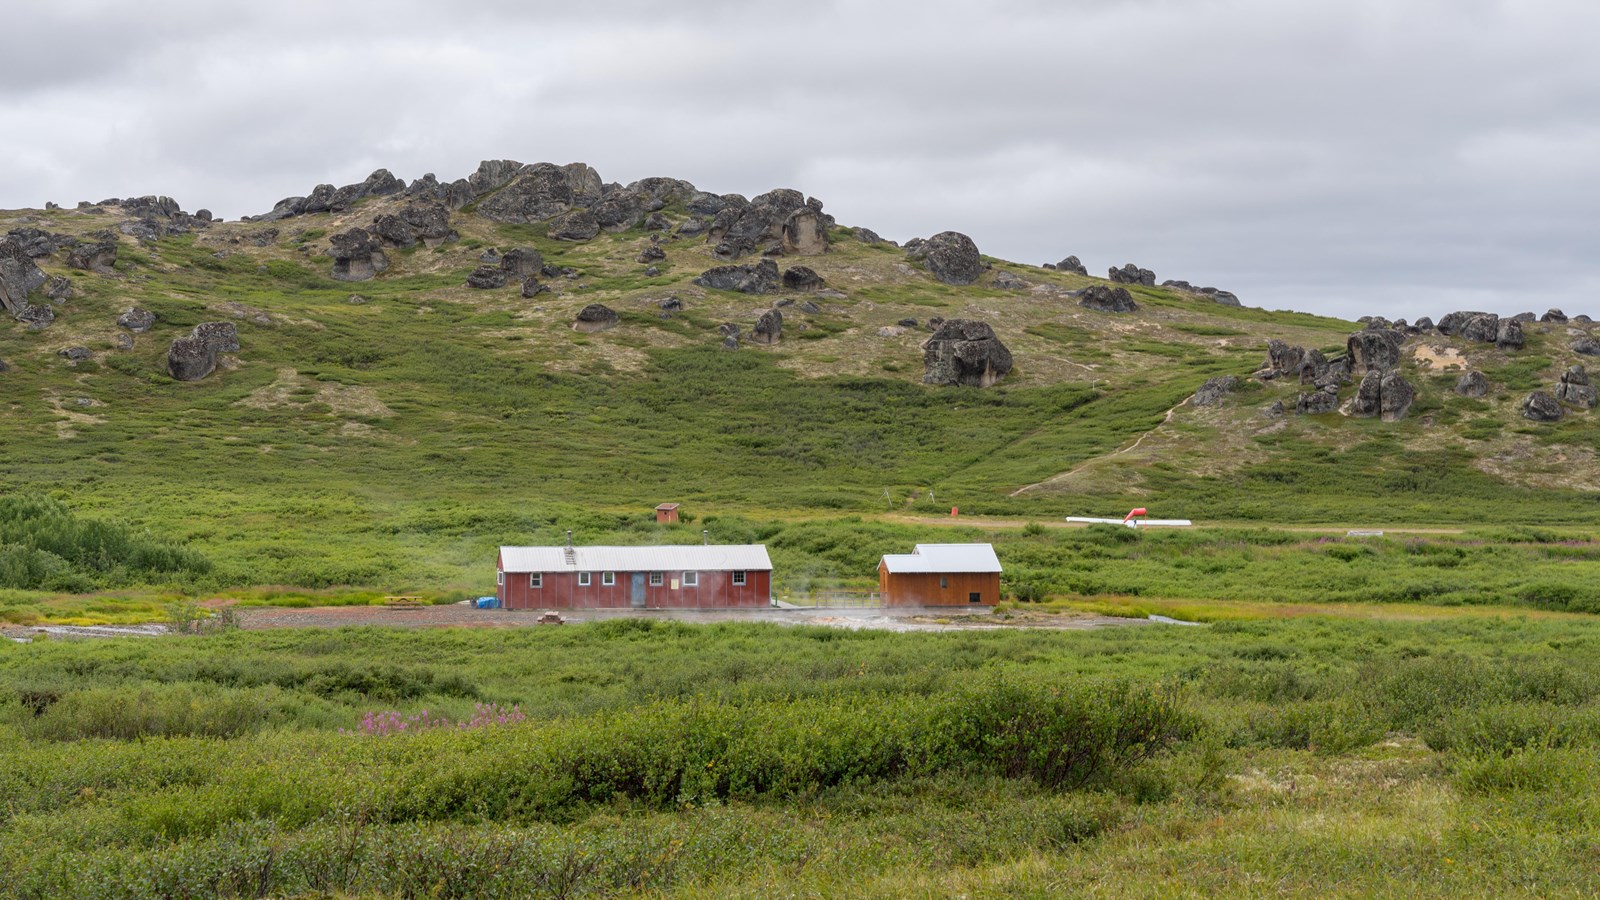 A bunkhouse and bathhouse are nestled at the base of a bowl-shaped valley.